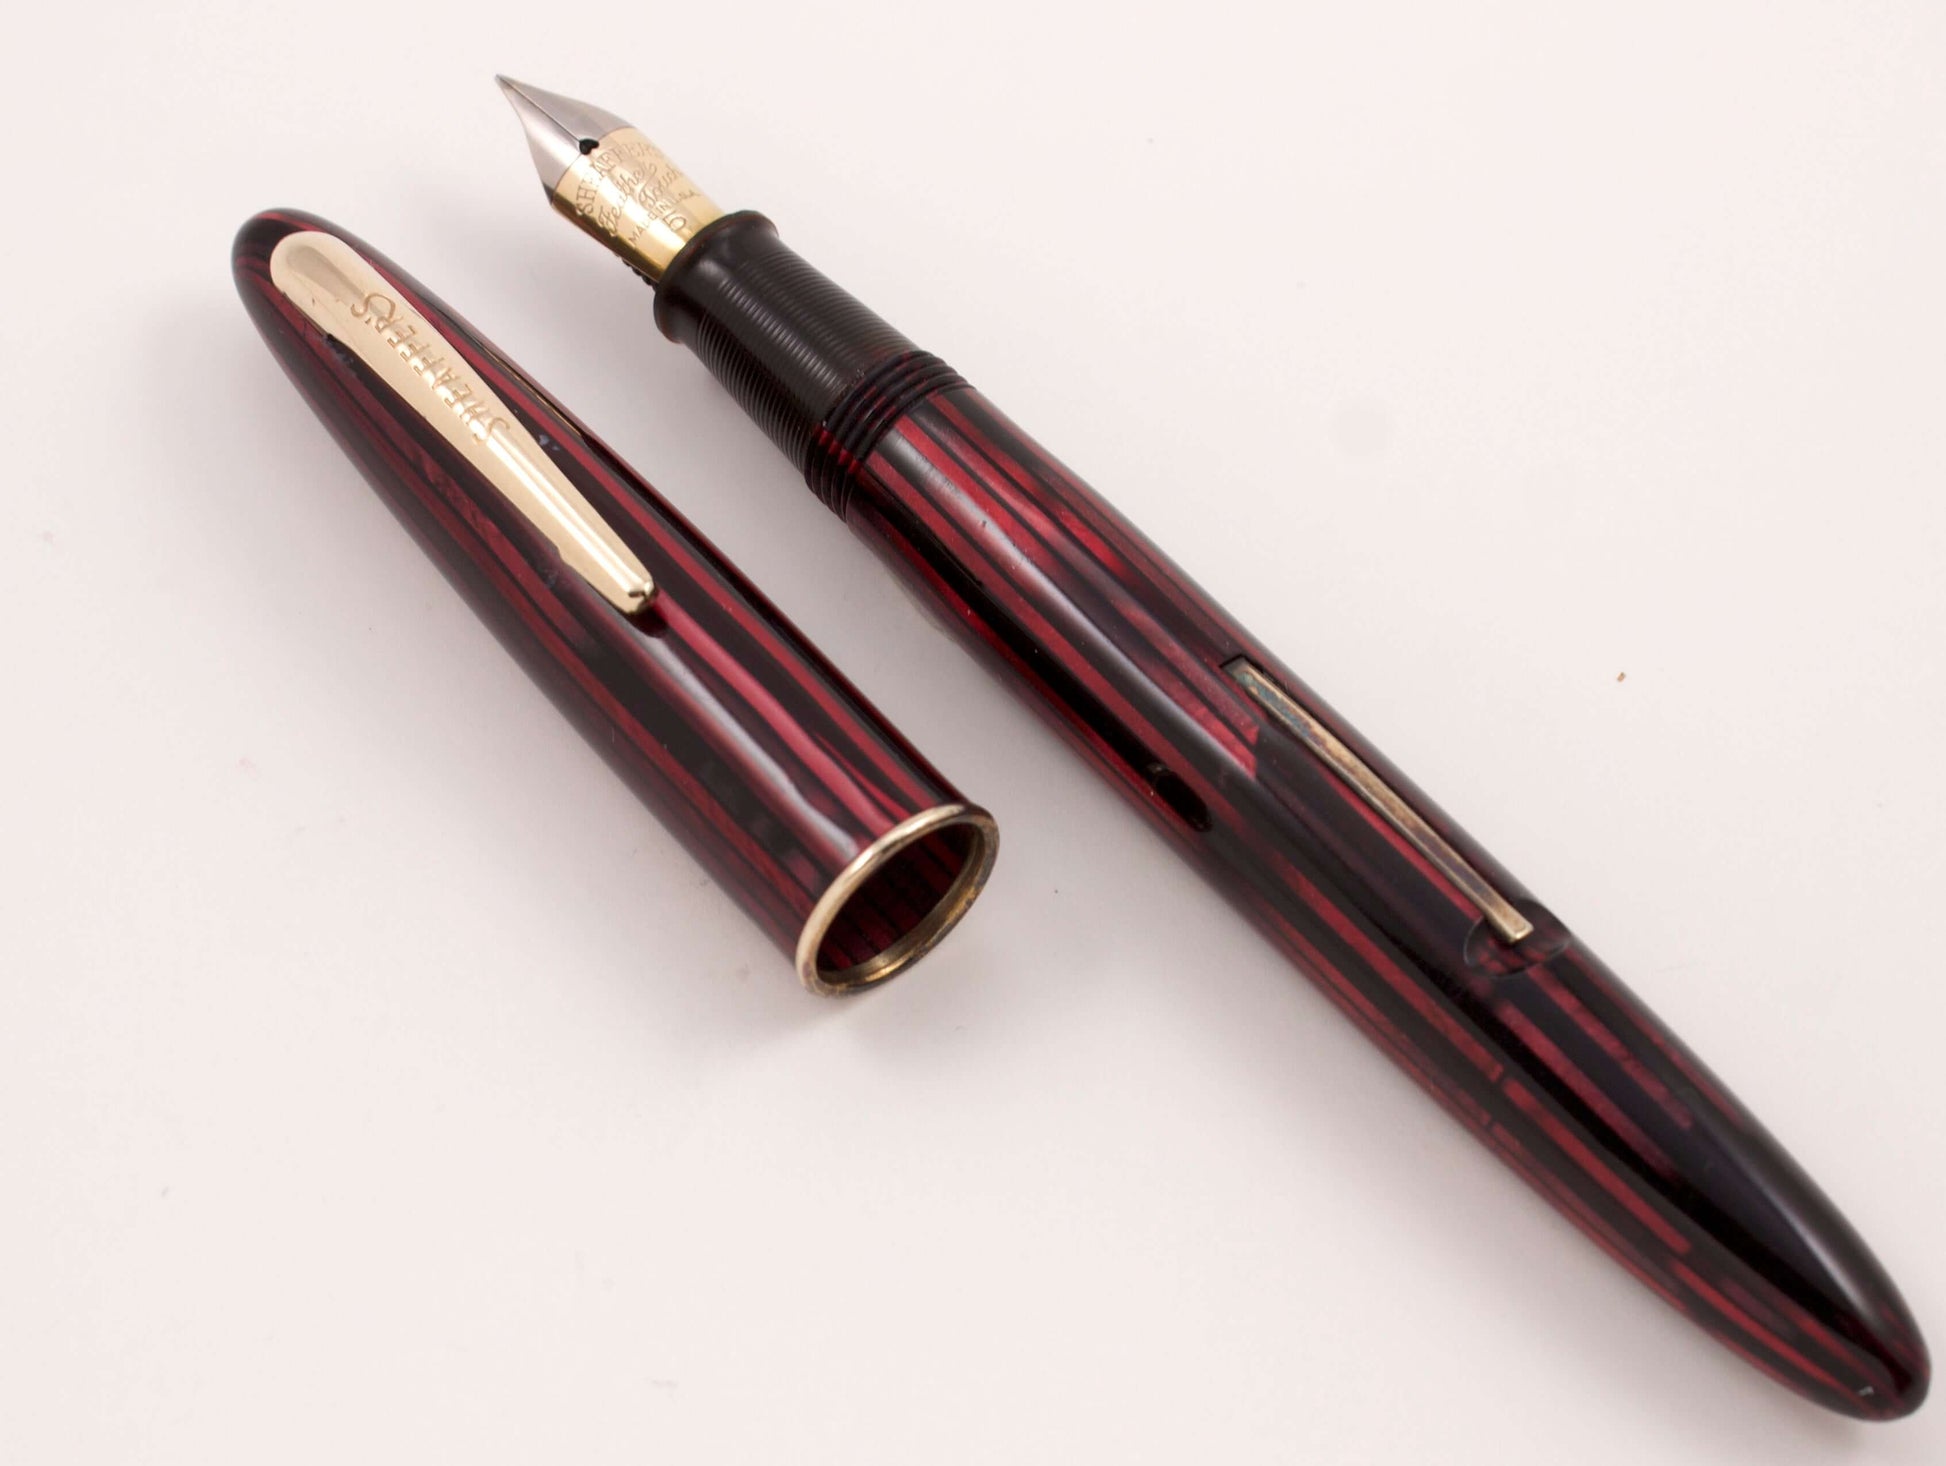 Sheaffer Craftsman Lever Filler, Carmine Red. Number 5 Feather Touch 14K Gold Nib Fine Point. Type: Lever Filler Vintage Fountain Pen Product Name: Sheaffer Craftsman Manufacturer and Year: Approx. 1945 Length: 5 Inches Filling System: Lever Filler, with